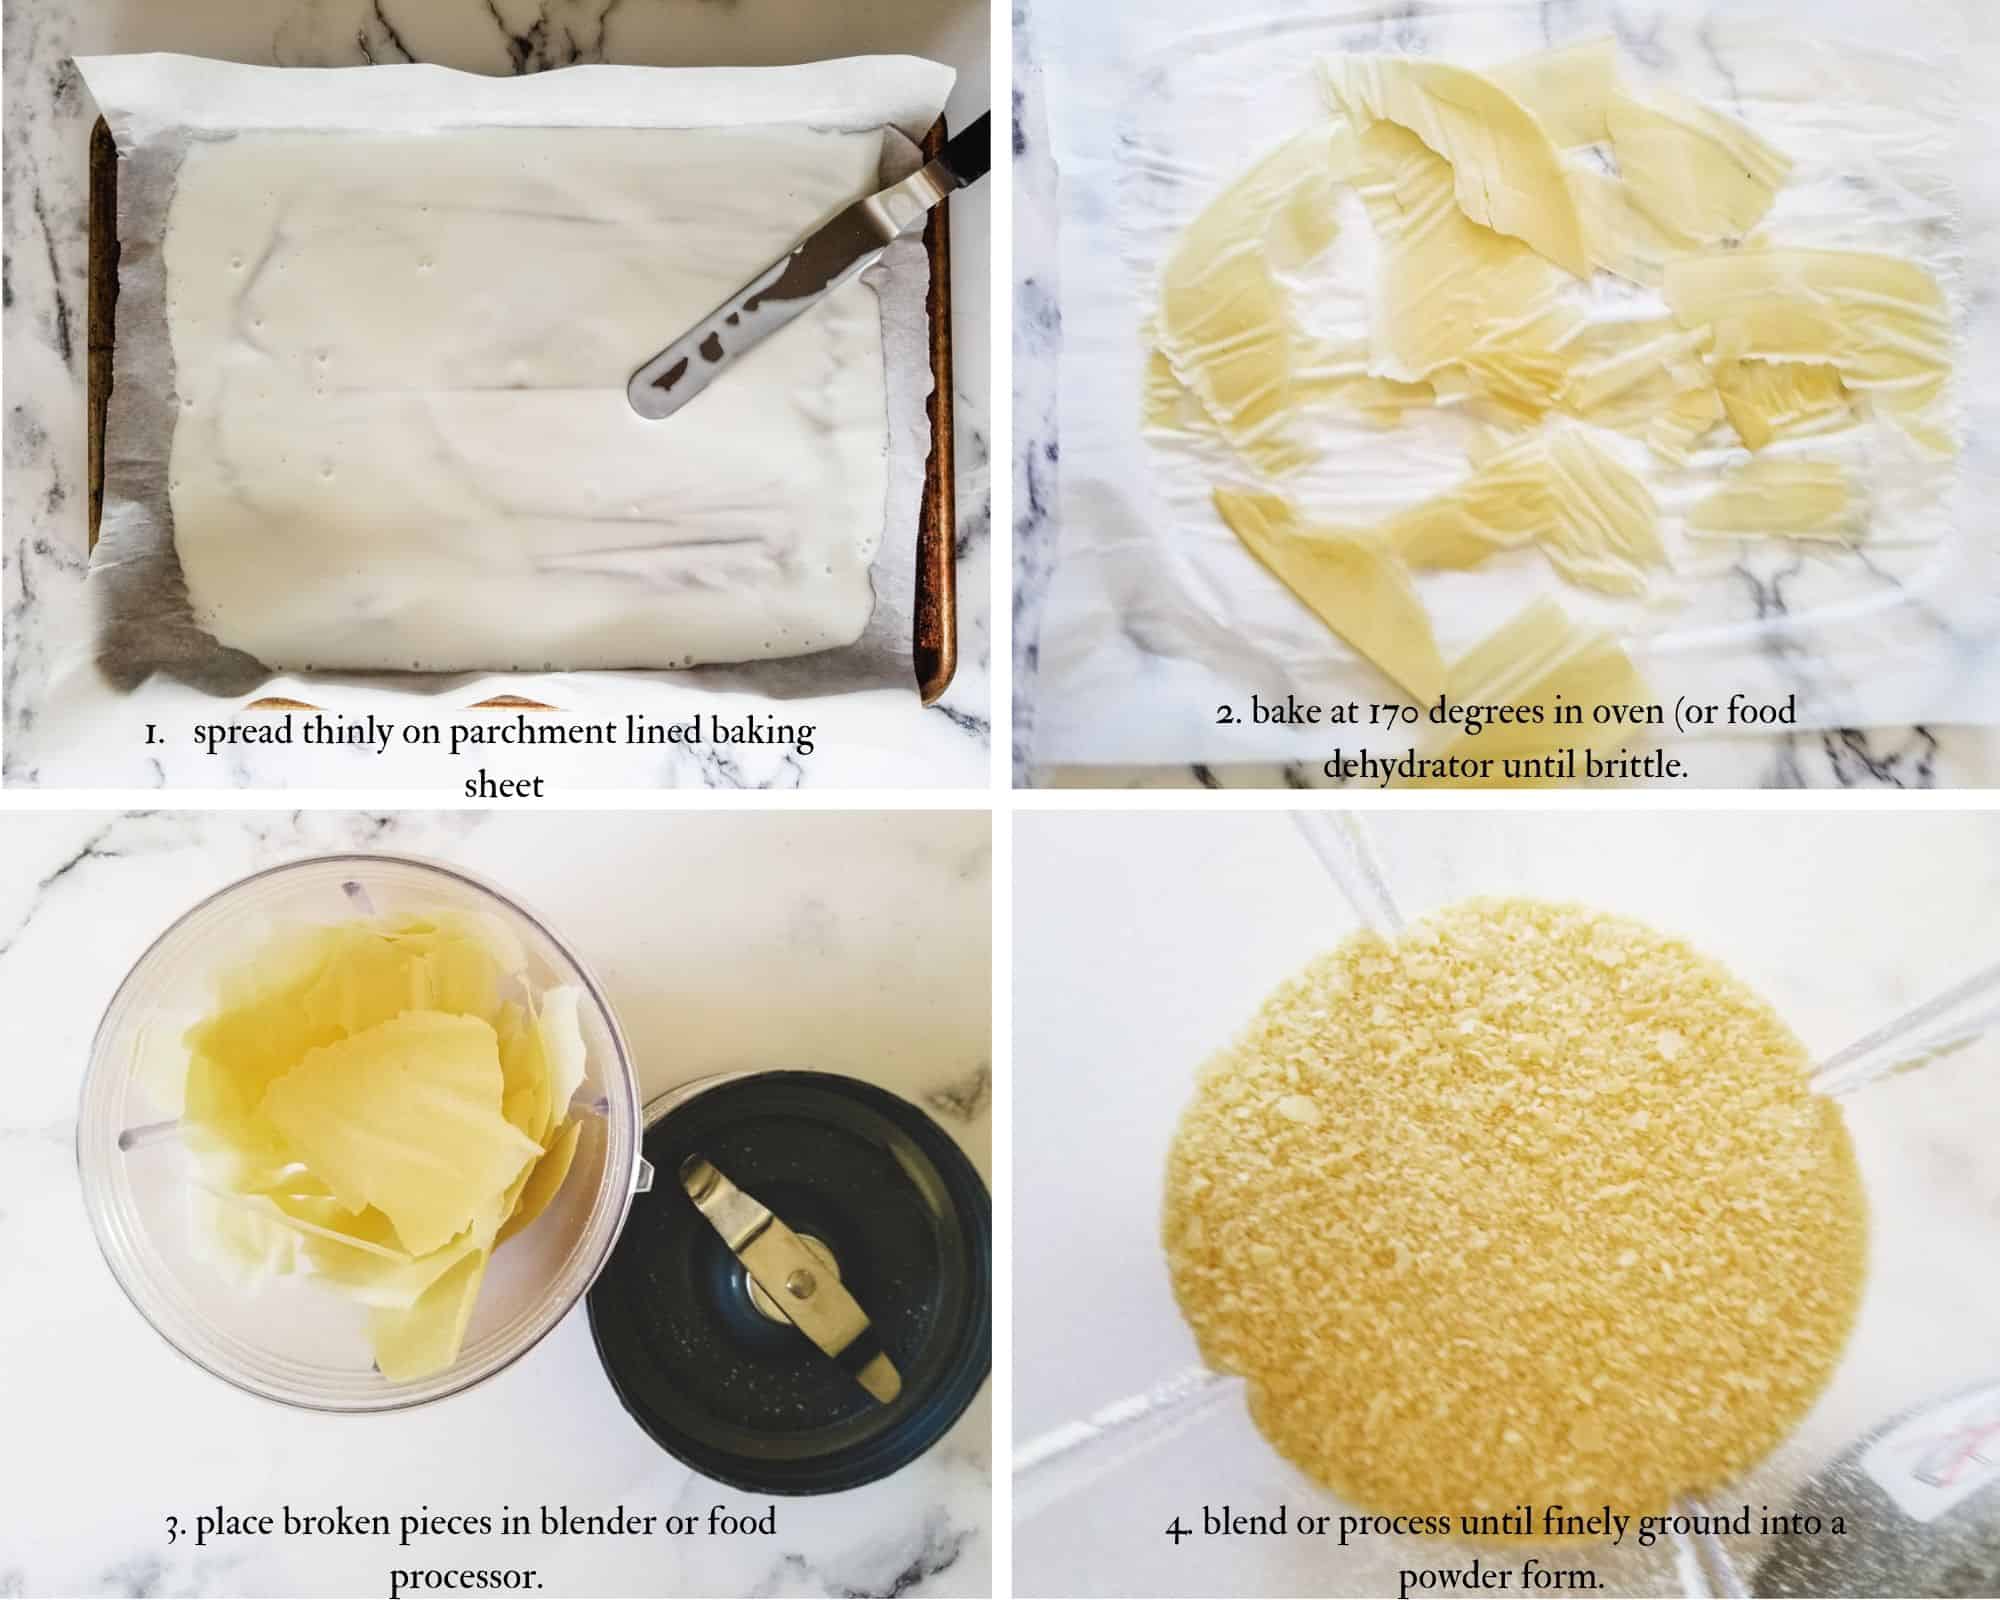 4 step info graphic showing steps to drying buttermilk into a powder